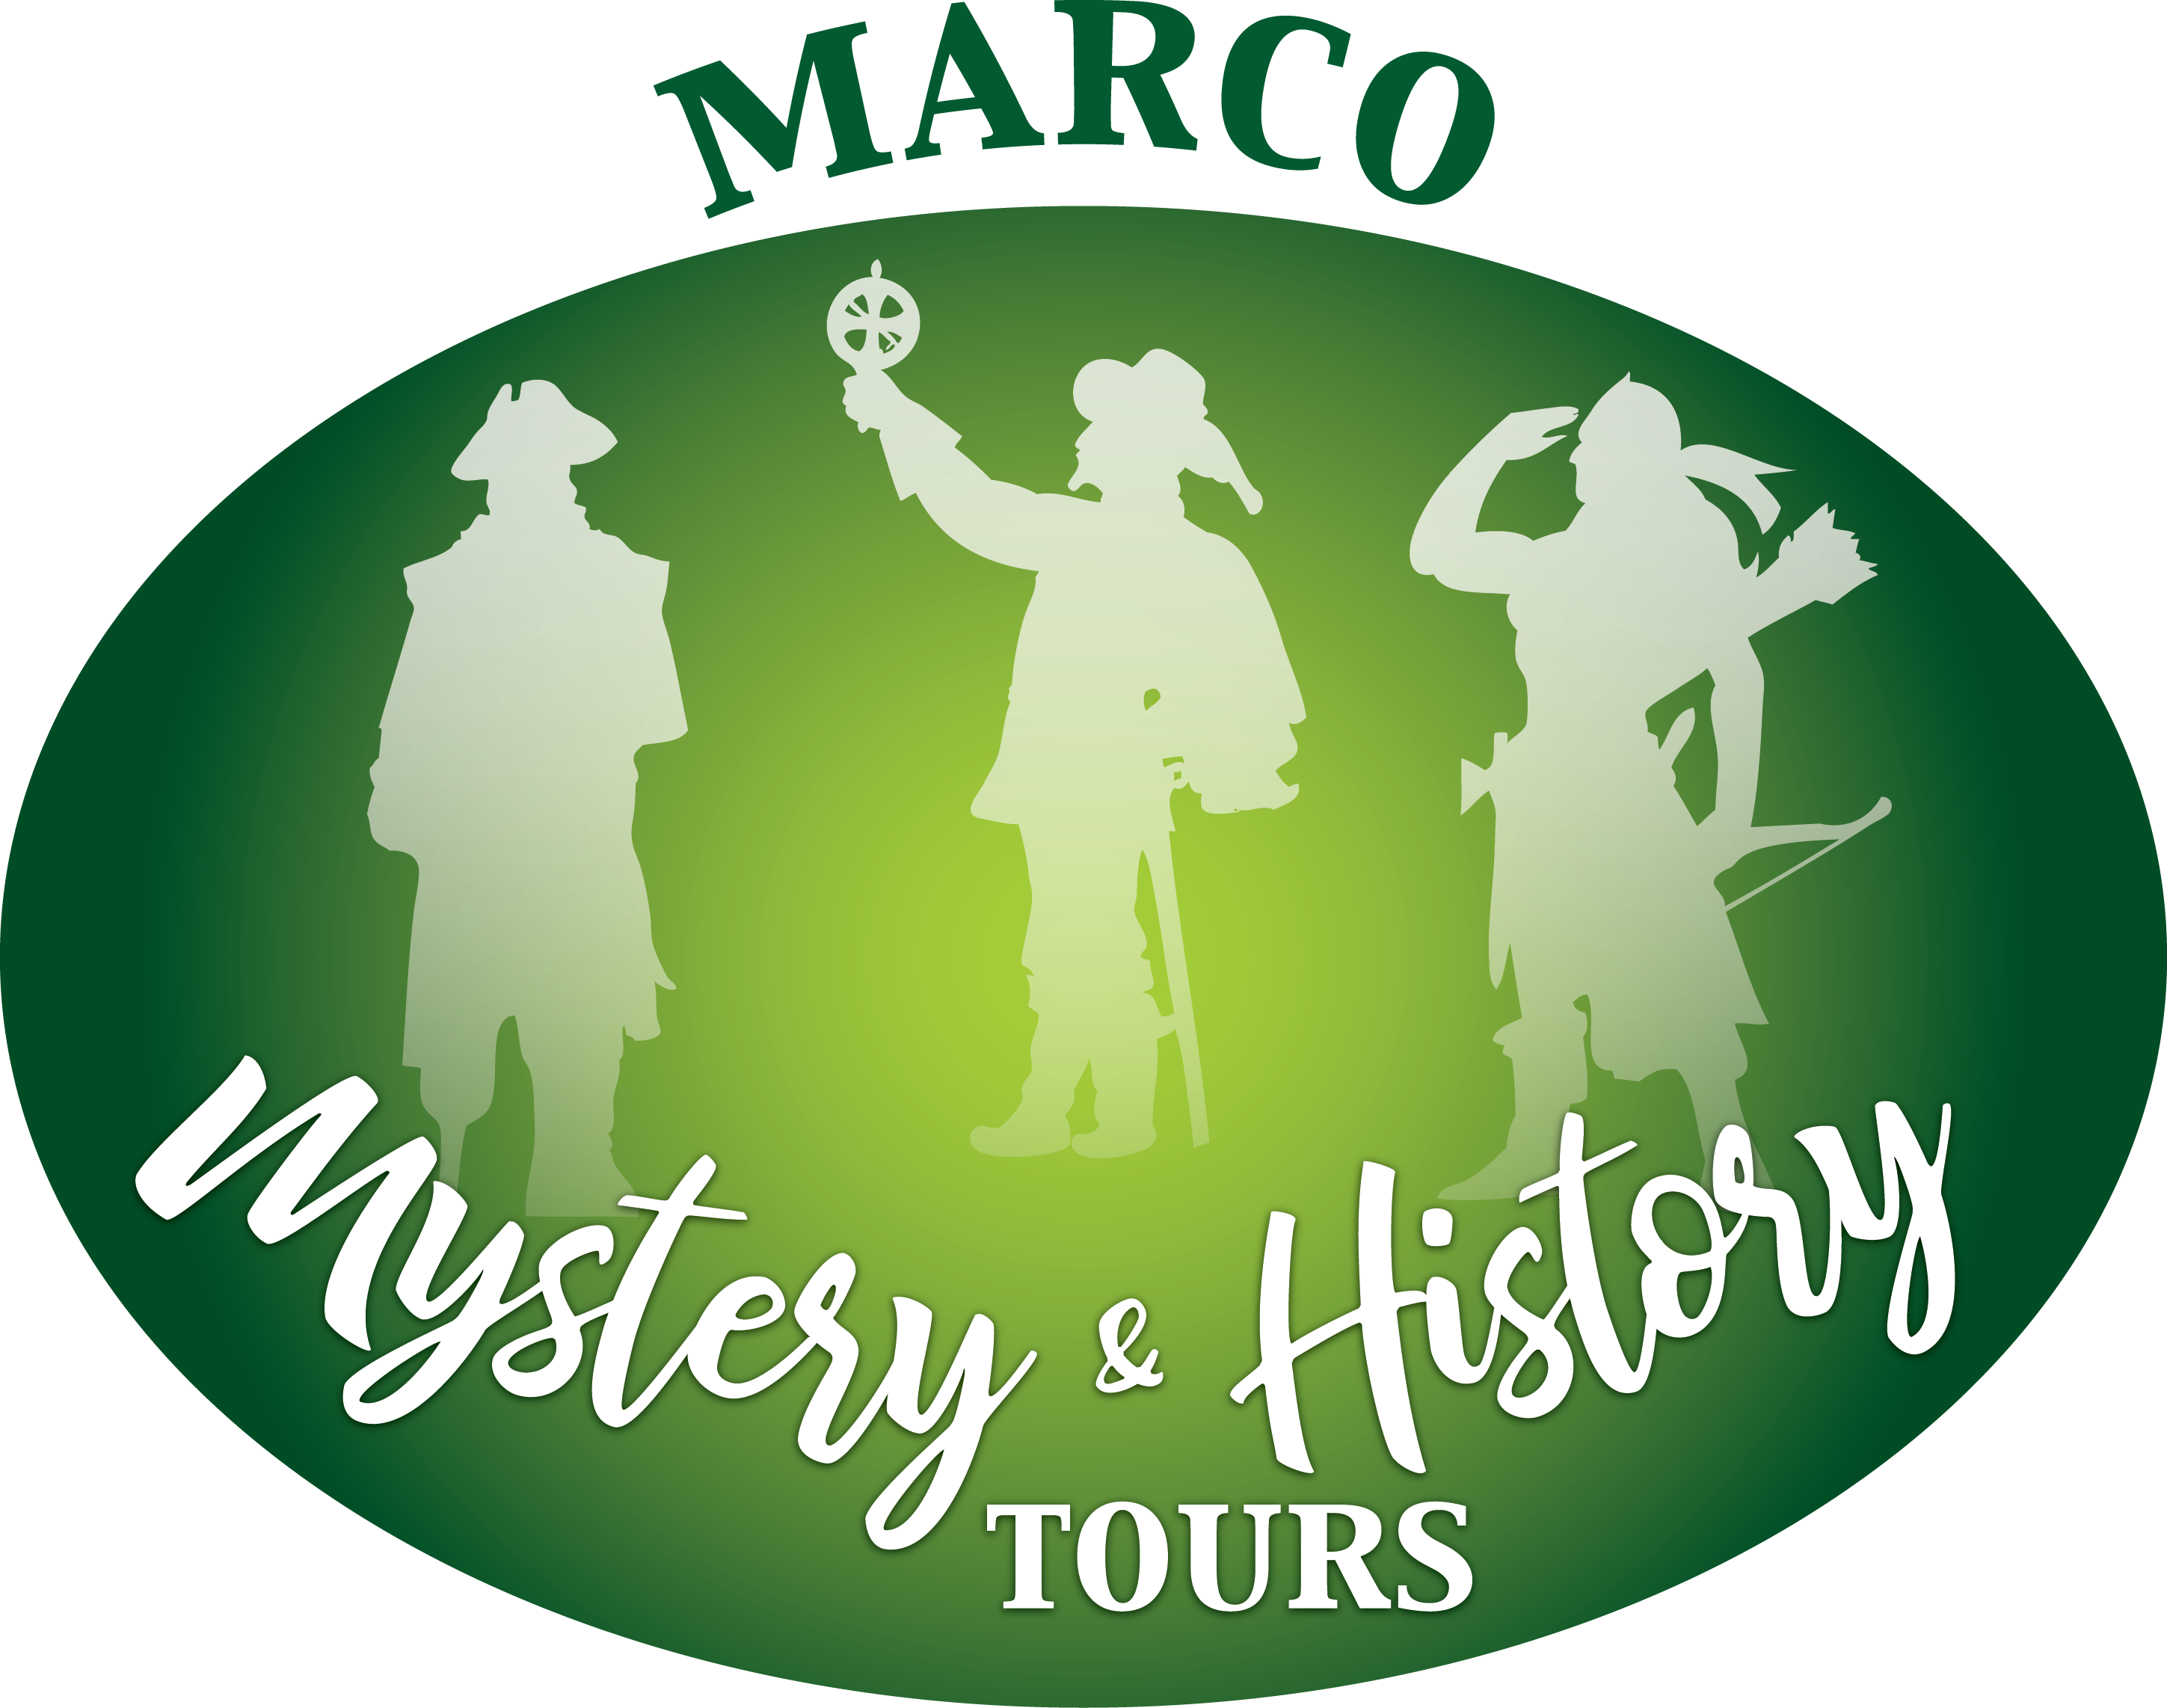 Marco Mystery & History Tours